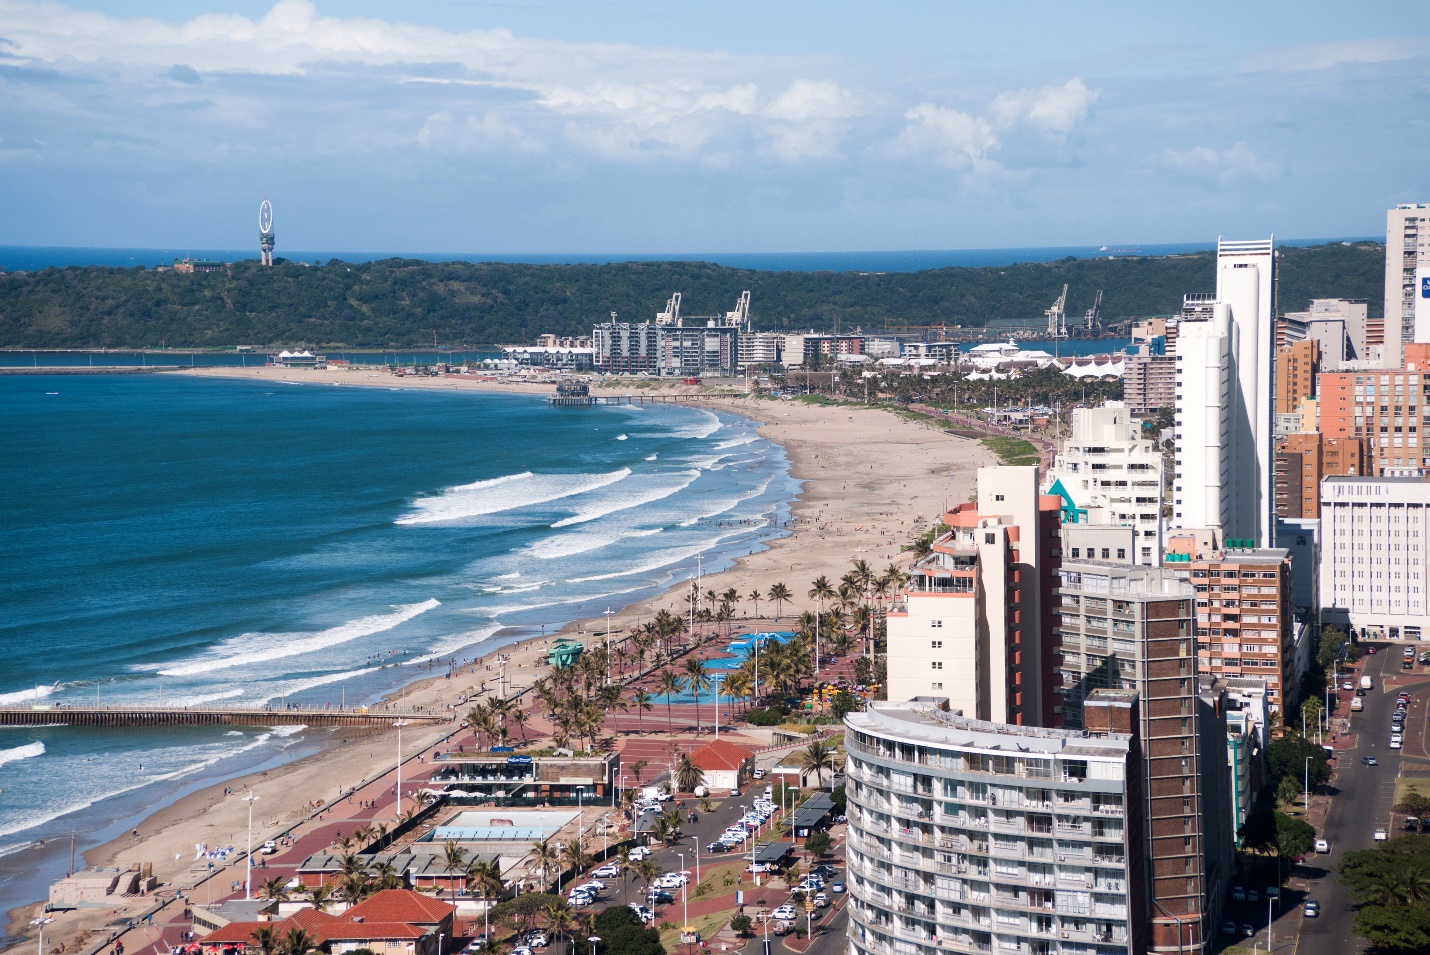 Attractions in Durban